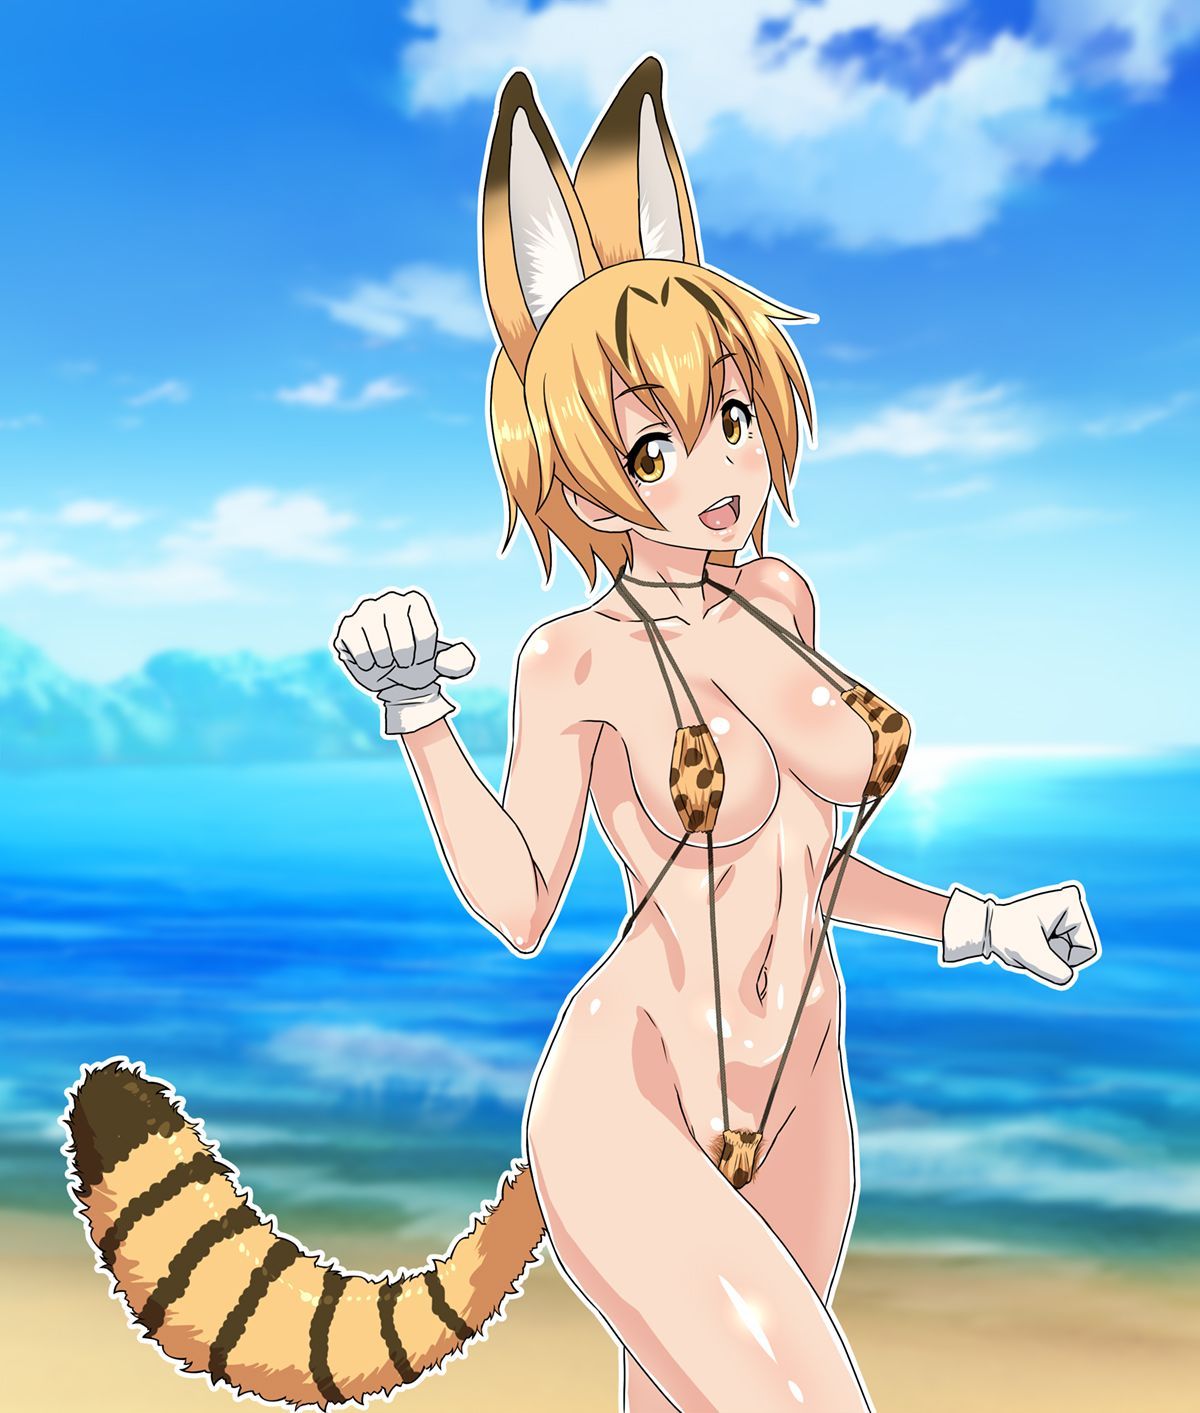 [Erotica character material] PNG background transmission erotic image such as anime character Part 314 54